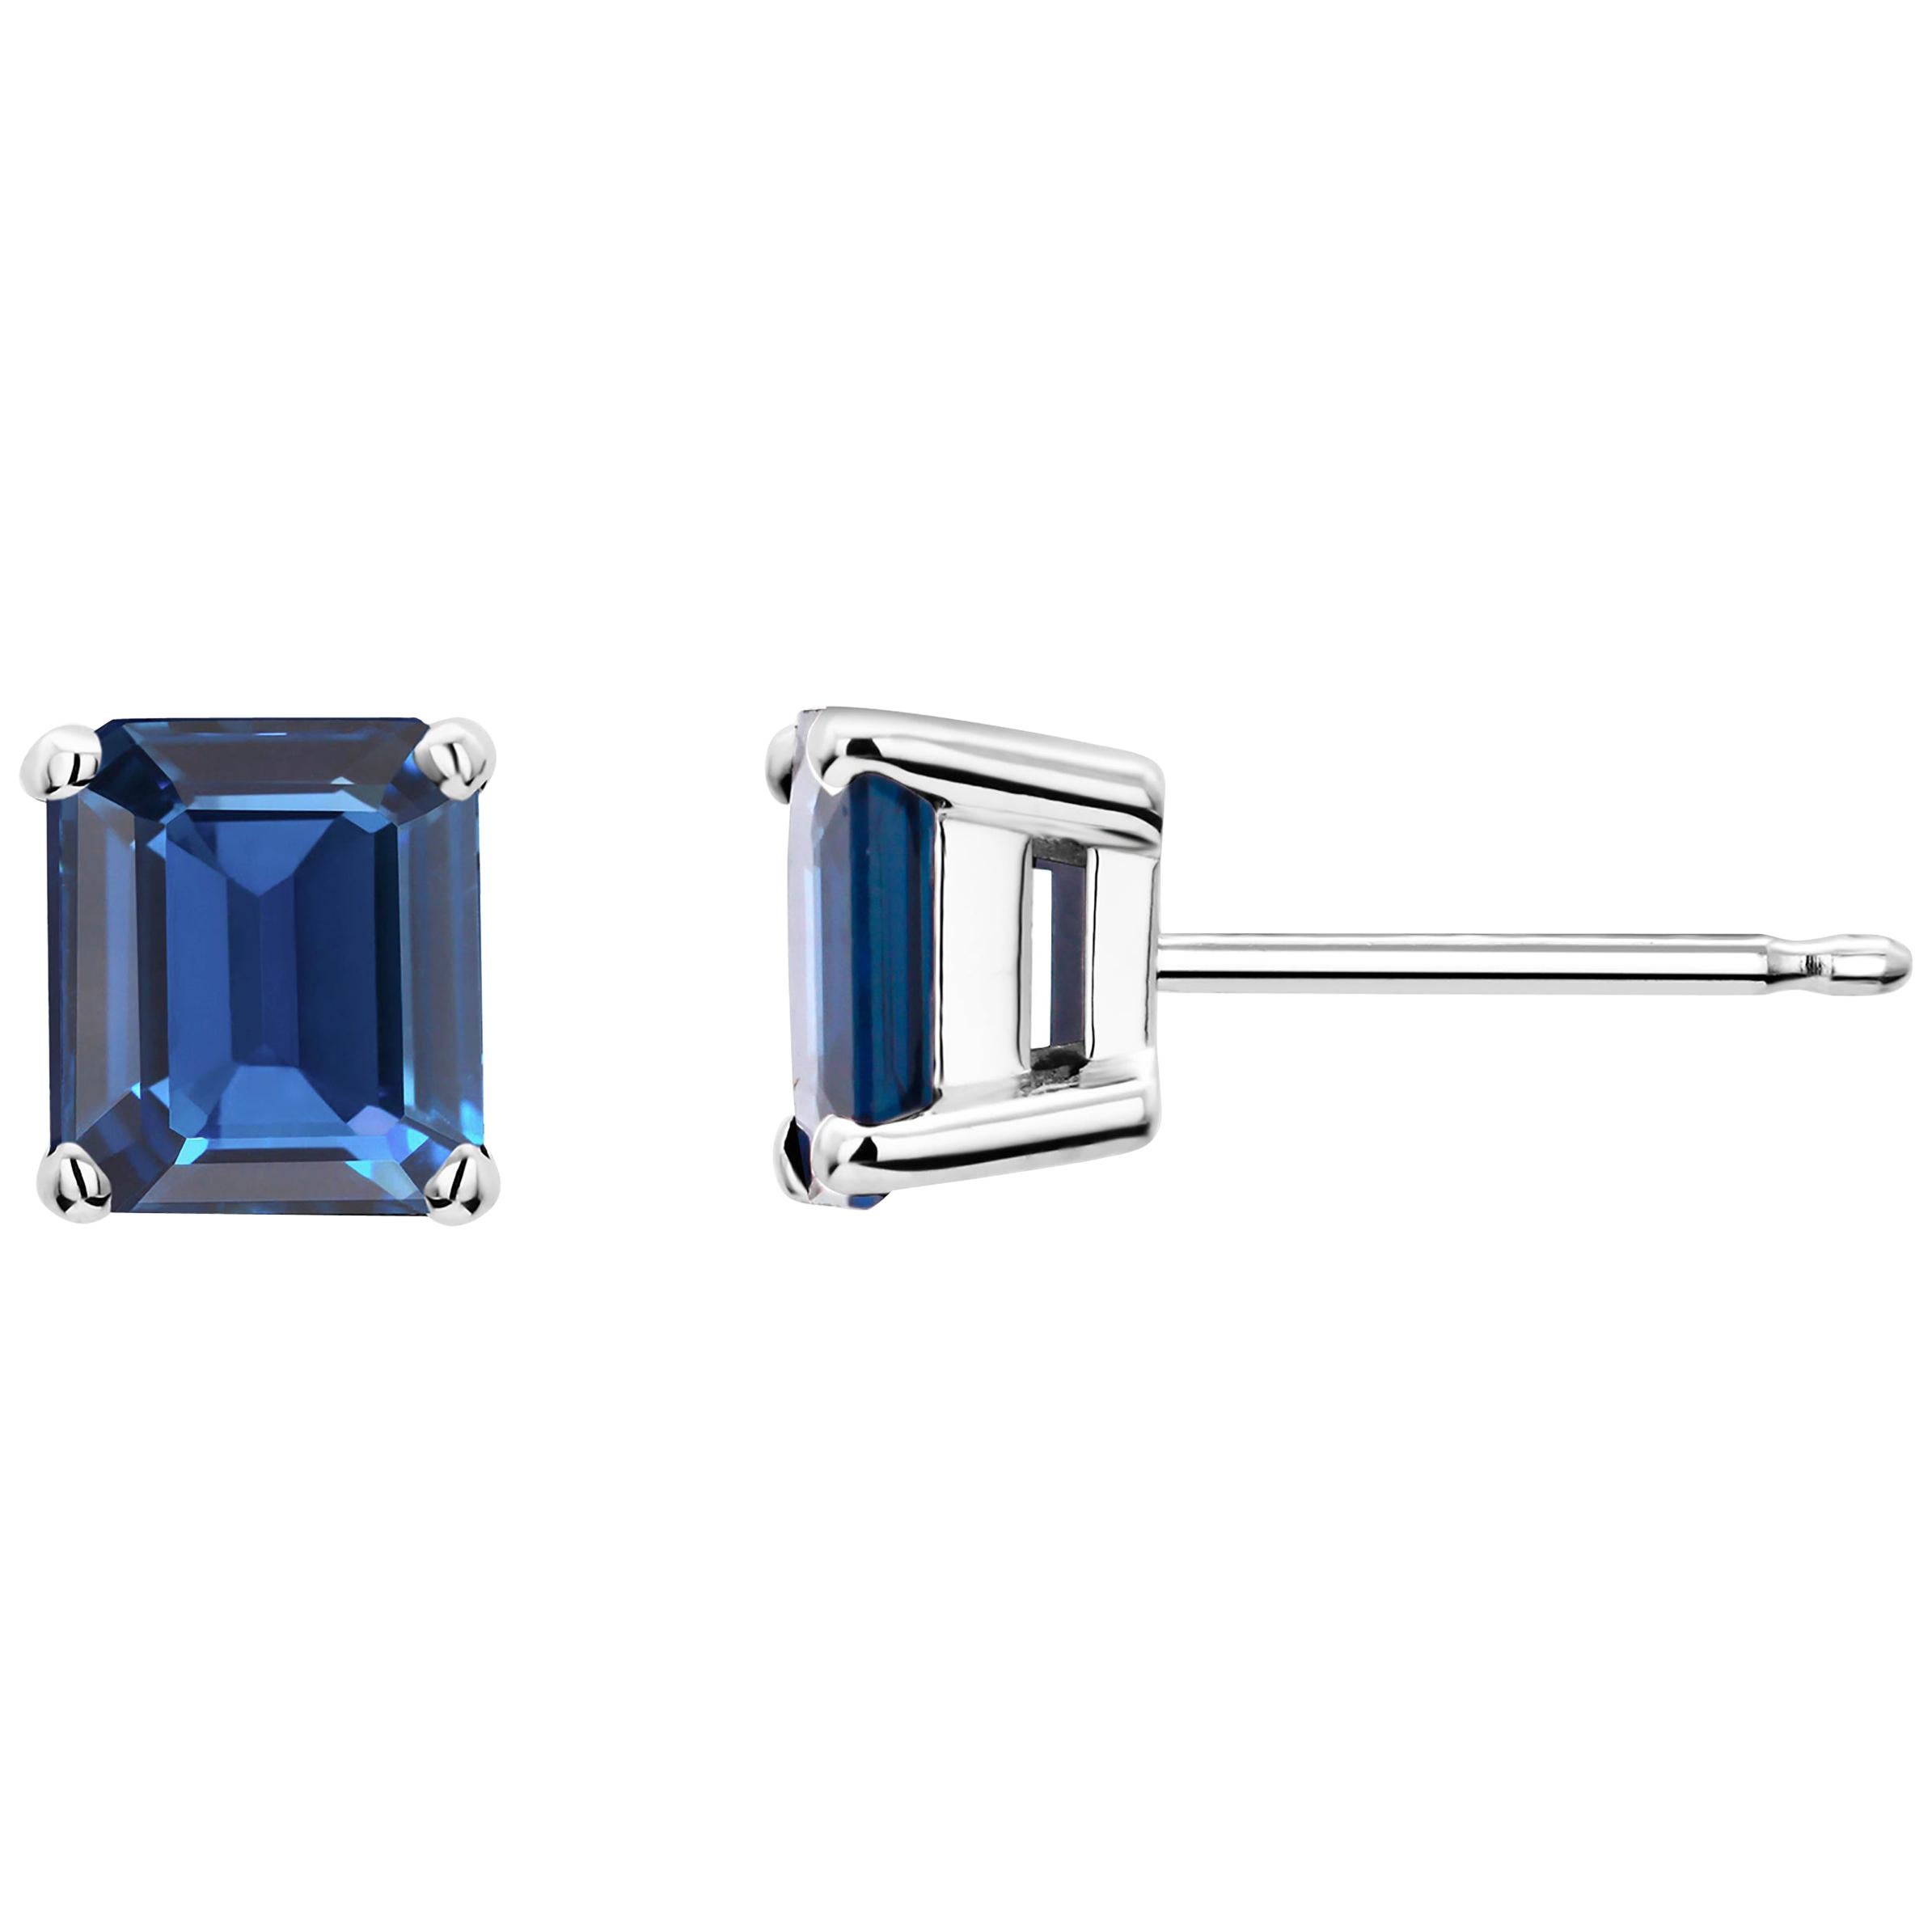 White Gold Emerald Cut Sapphires Stud Earrings Weighing 1.61 Carat